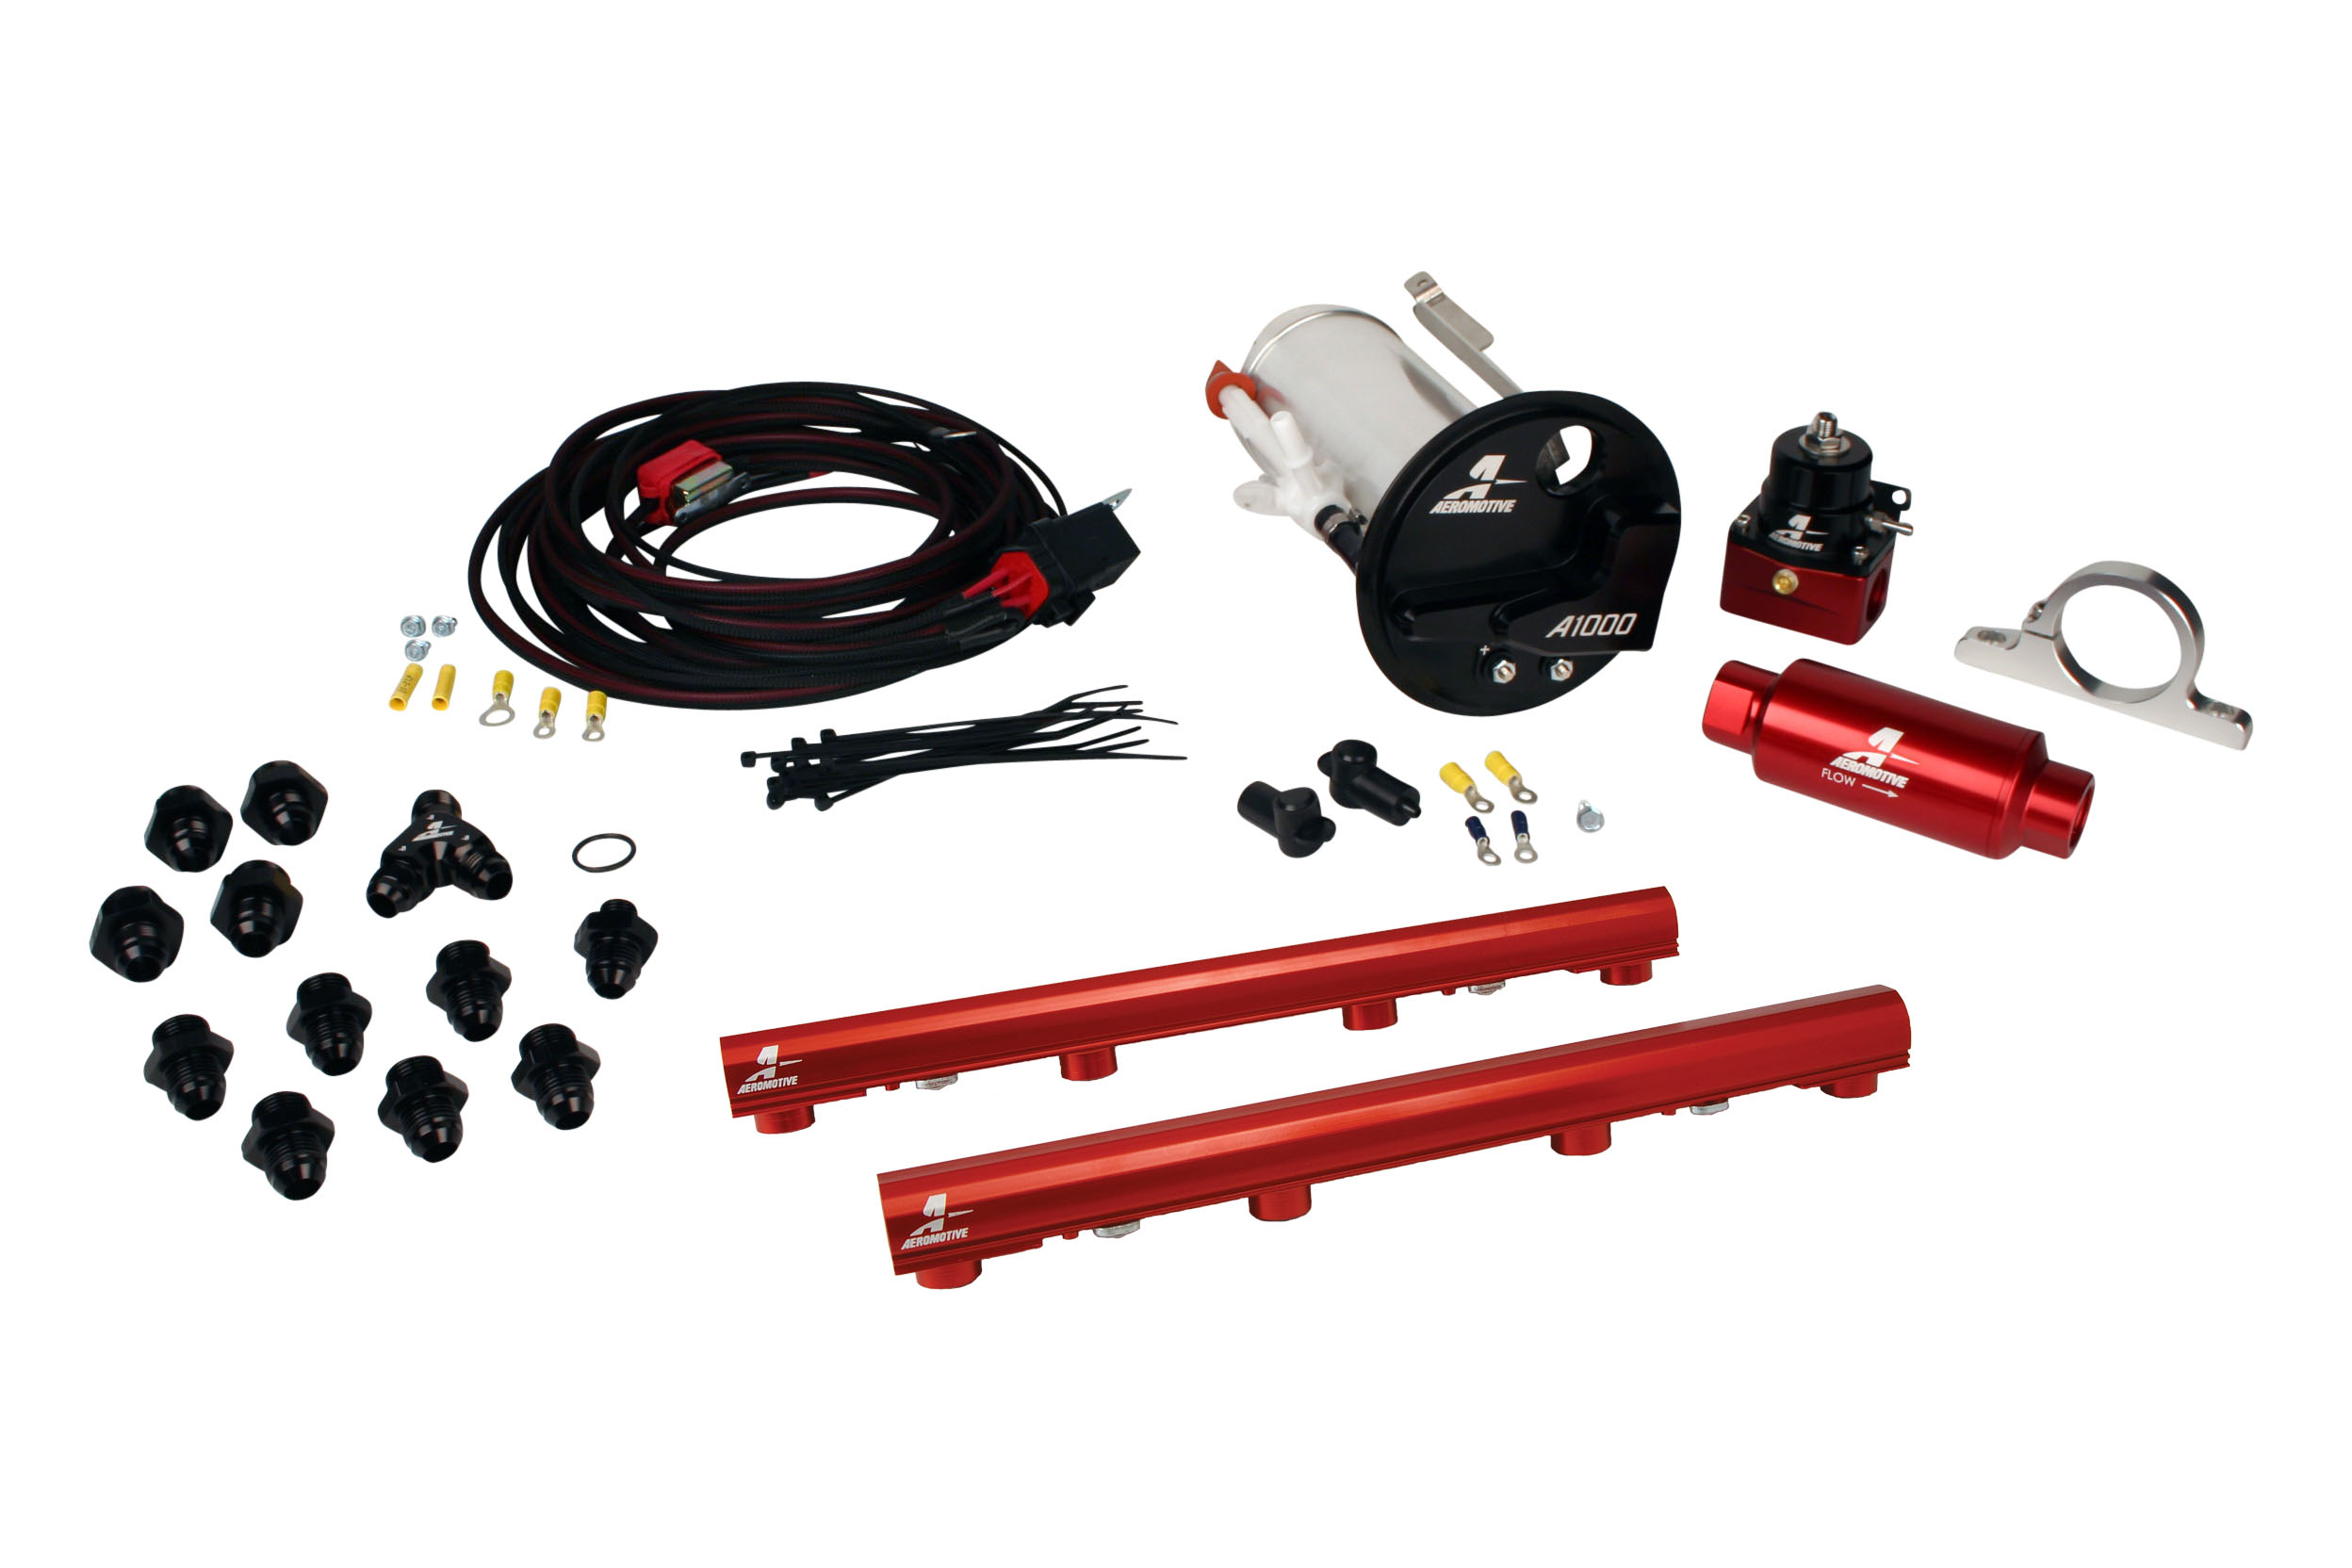 2007-2012 Ford Mustang Shelby GT500 Aeromotive Stealth A1000 Race Fuel System w/4.6L 3-V Fuel Rails